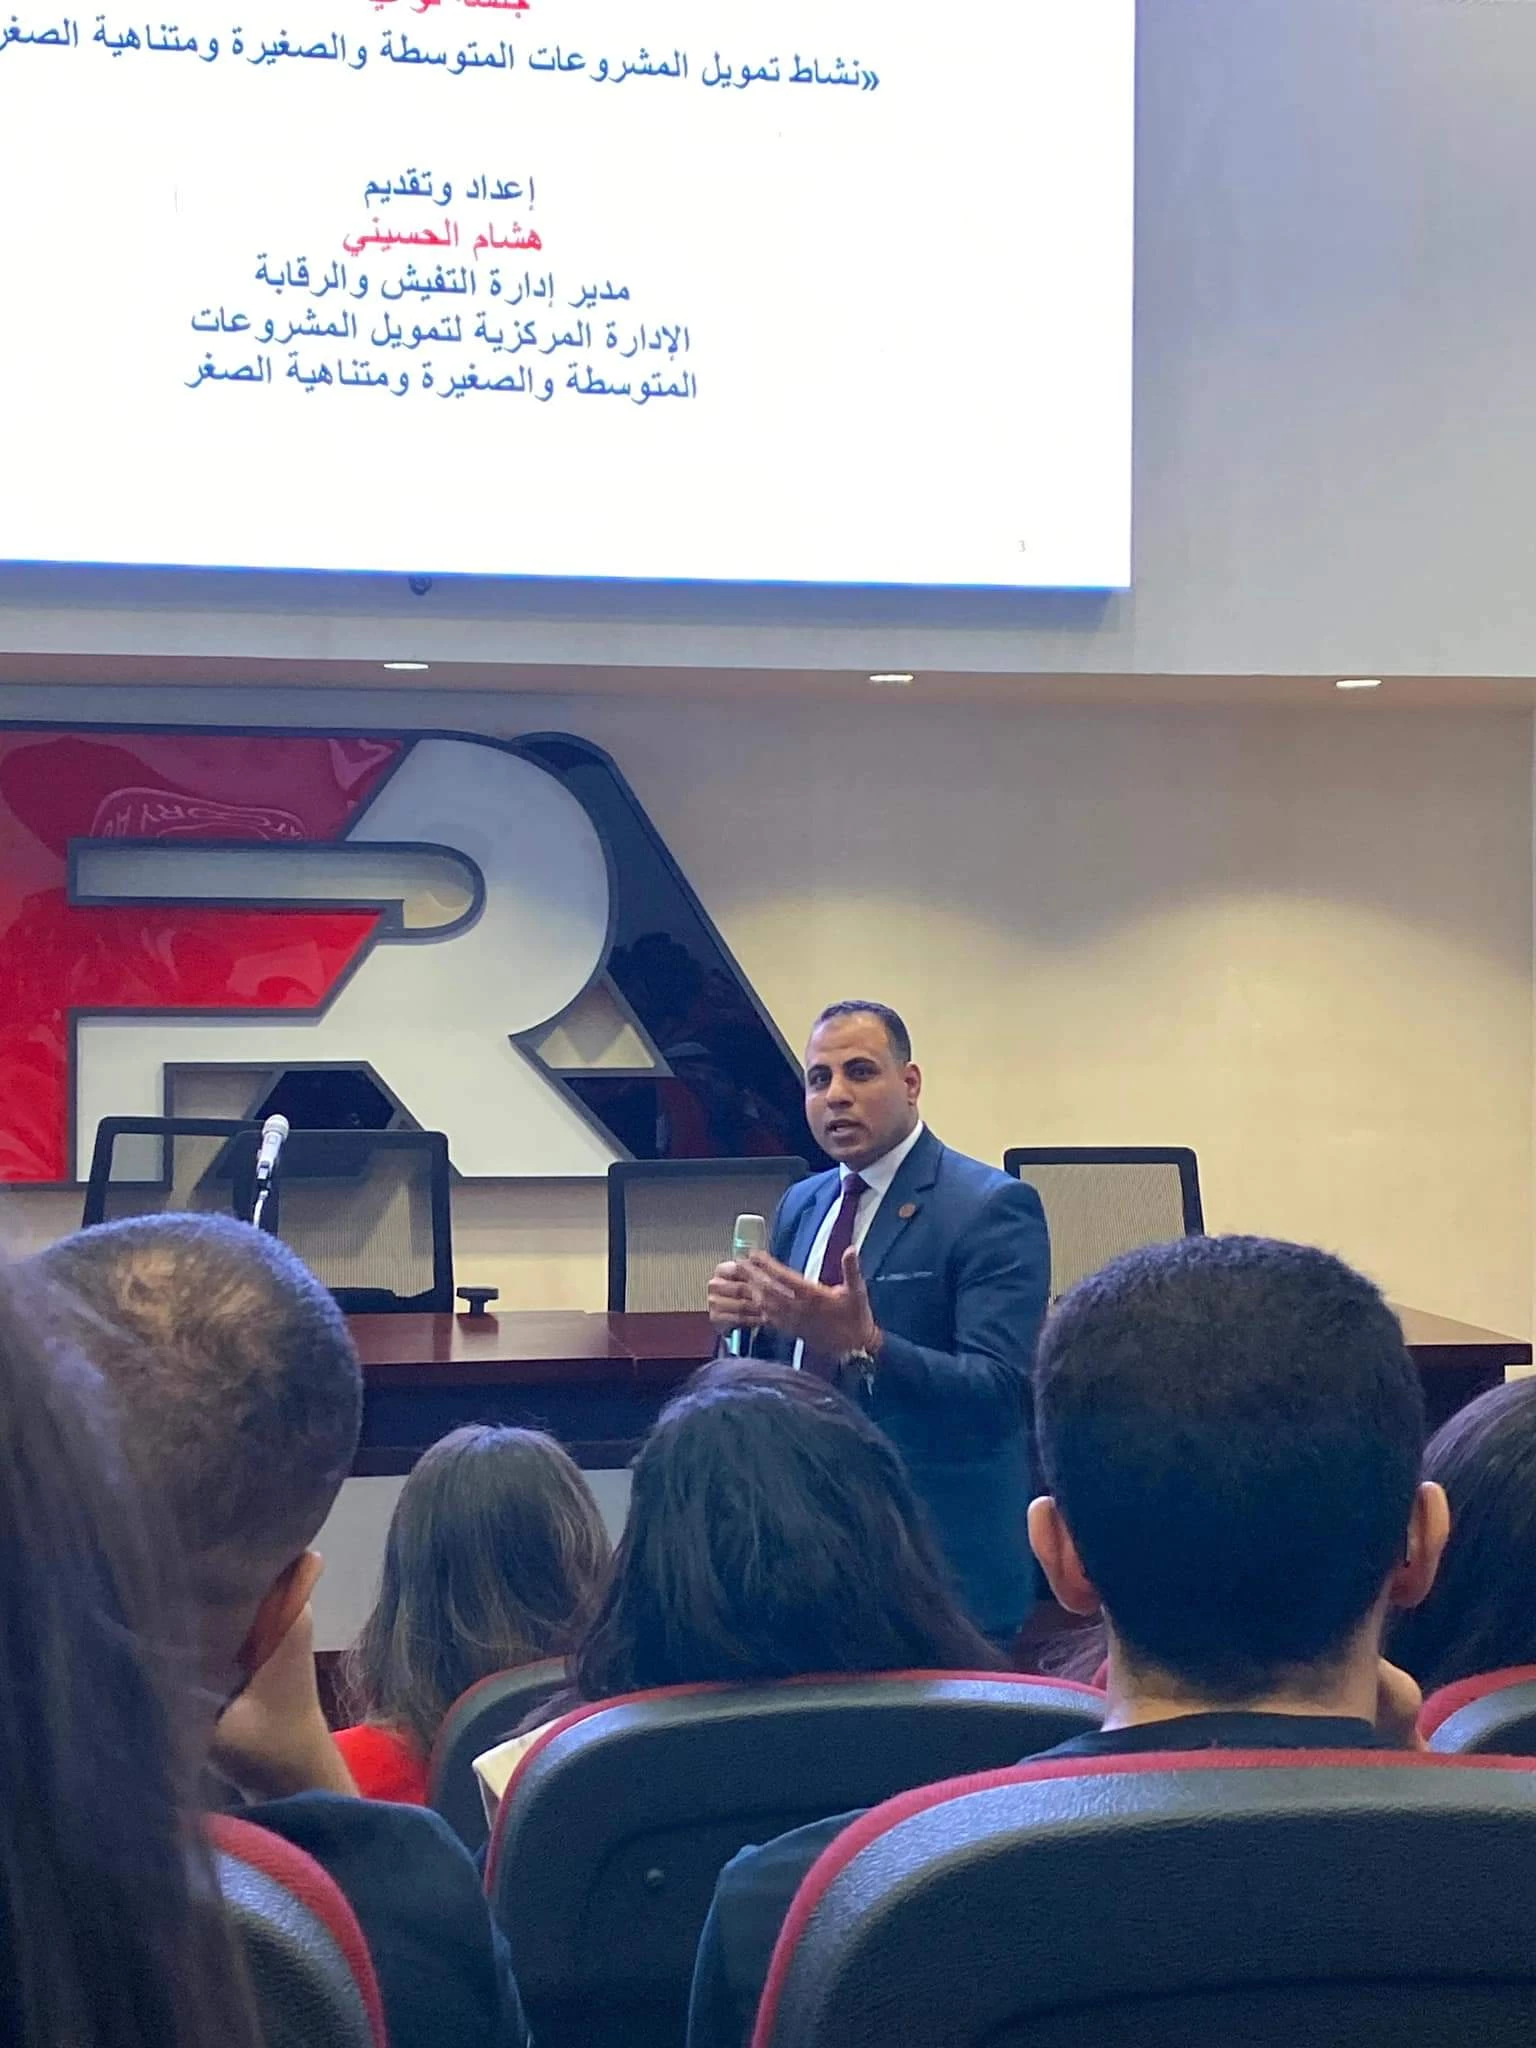 The Department of cultural and social activity in Miami organized a scientific trip to the headquarters of the General Authority for financial supervision in the smart village in Cairo on: 8/11/202314